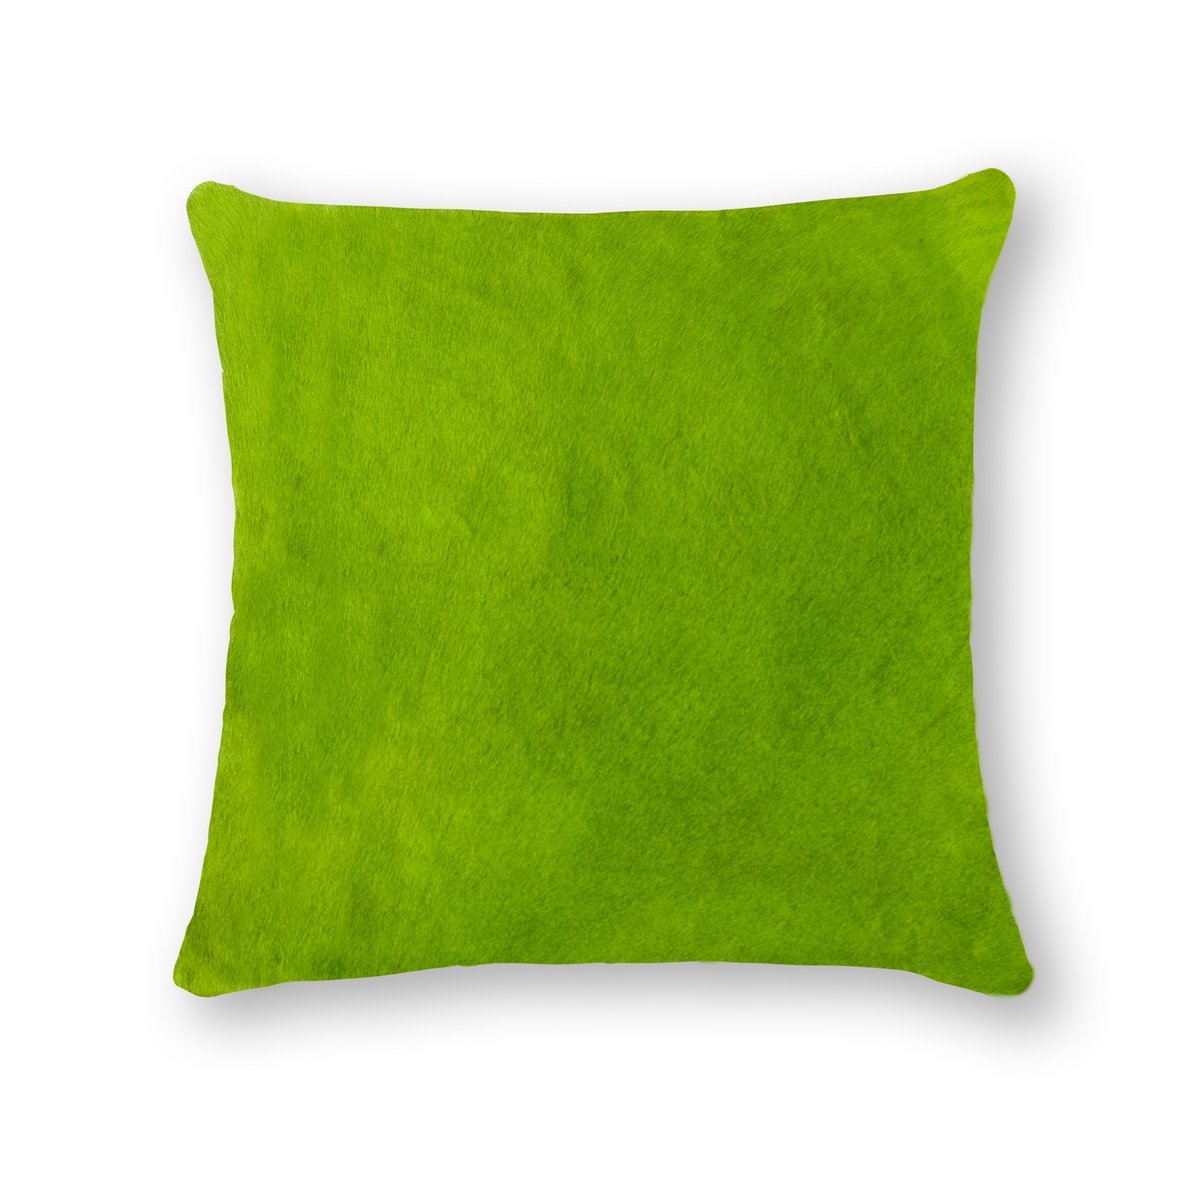 Natural Rugs 676685 Natural Torino Cowhide Pillow 18x18 Lime